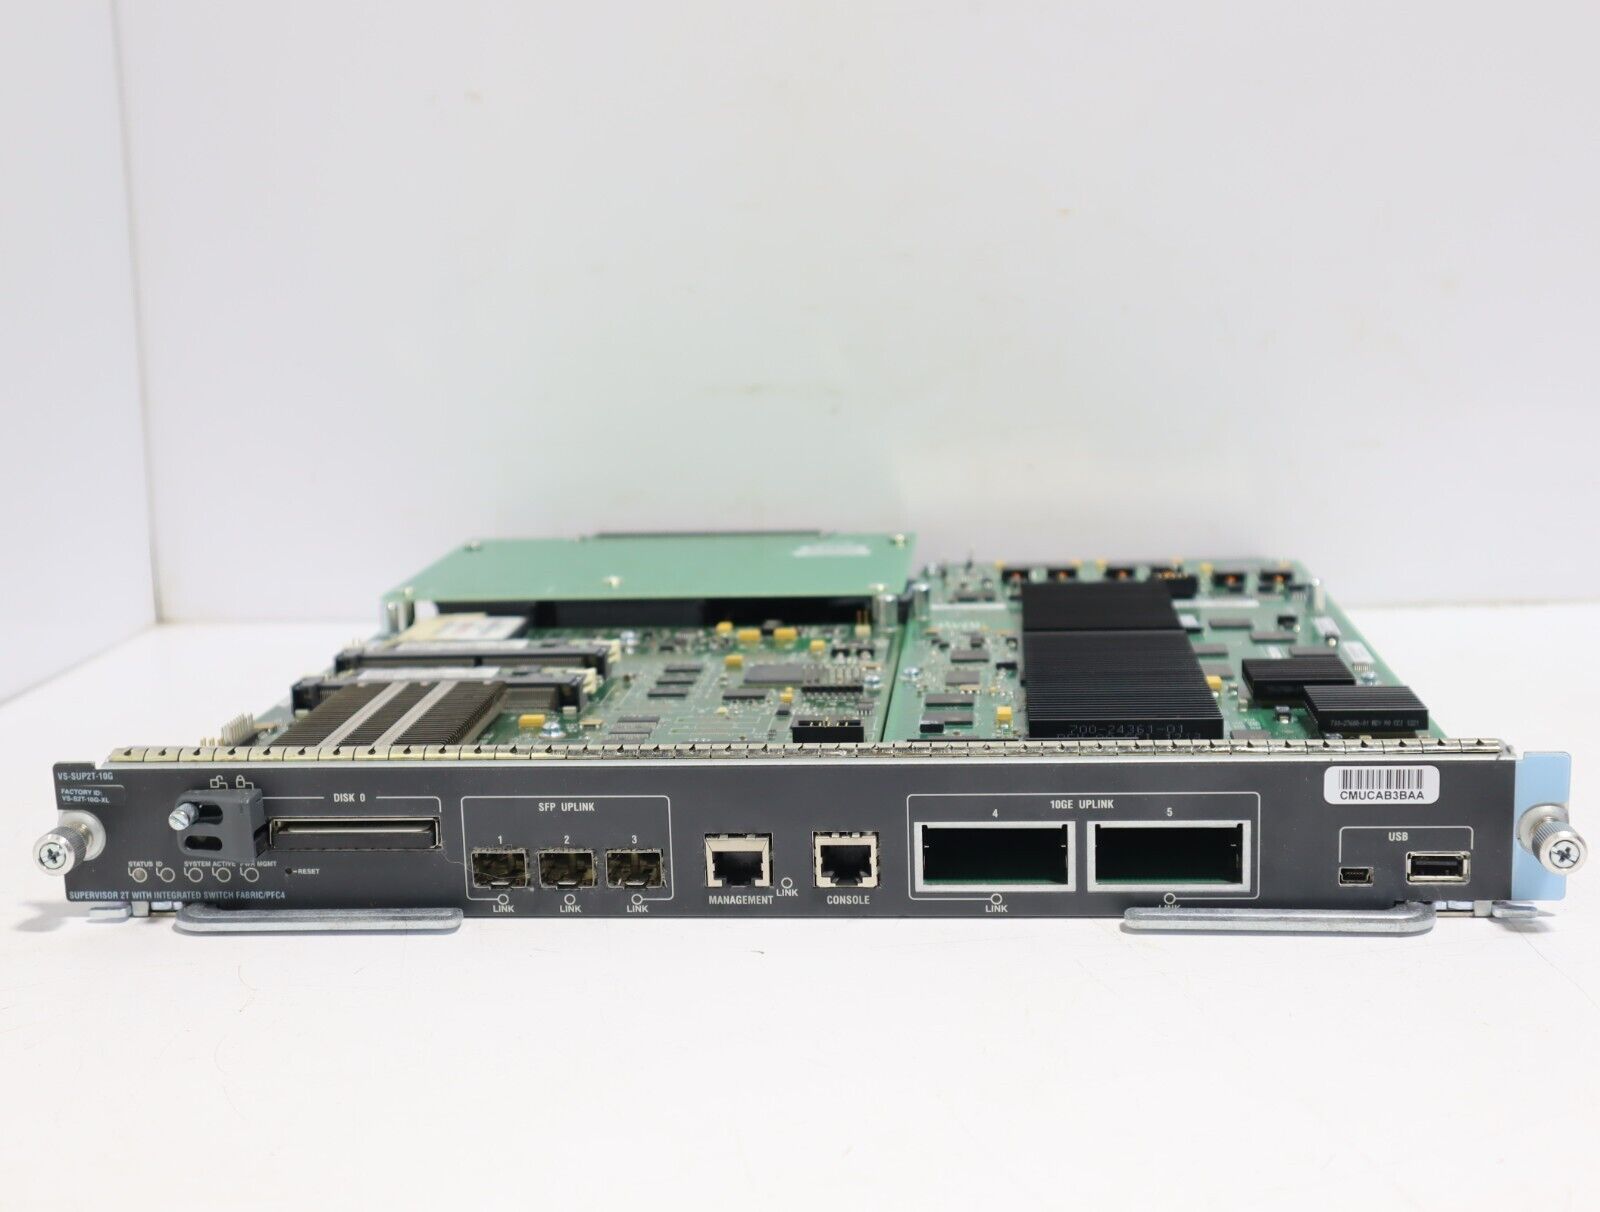 Cisco VS-SUP2T-10G Supervisor 2T with integrated switch fabric/PFC4(4K-007)